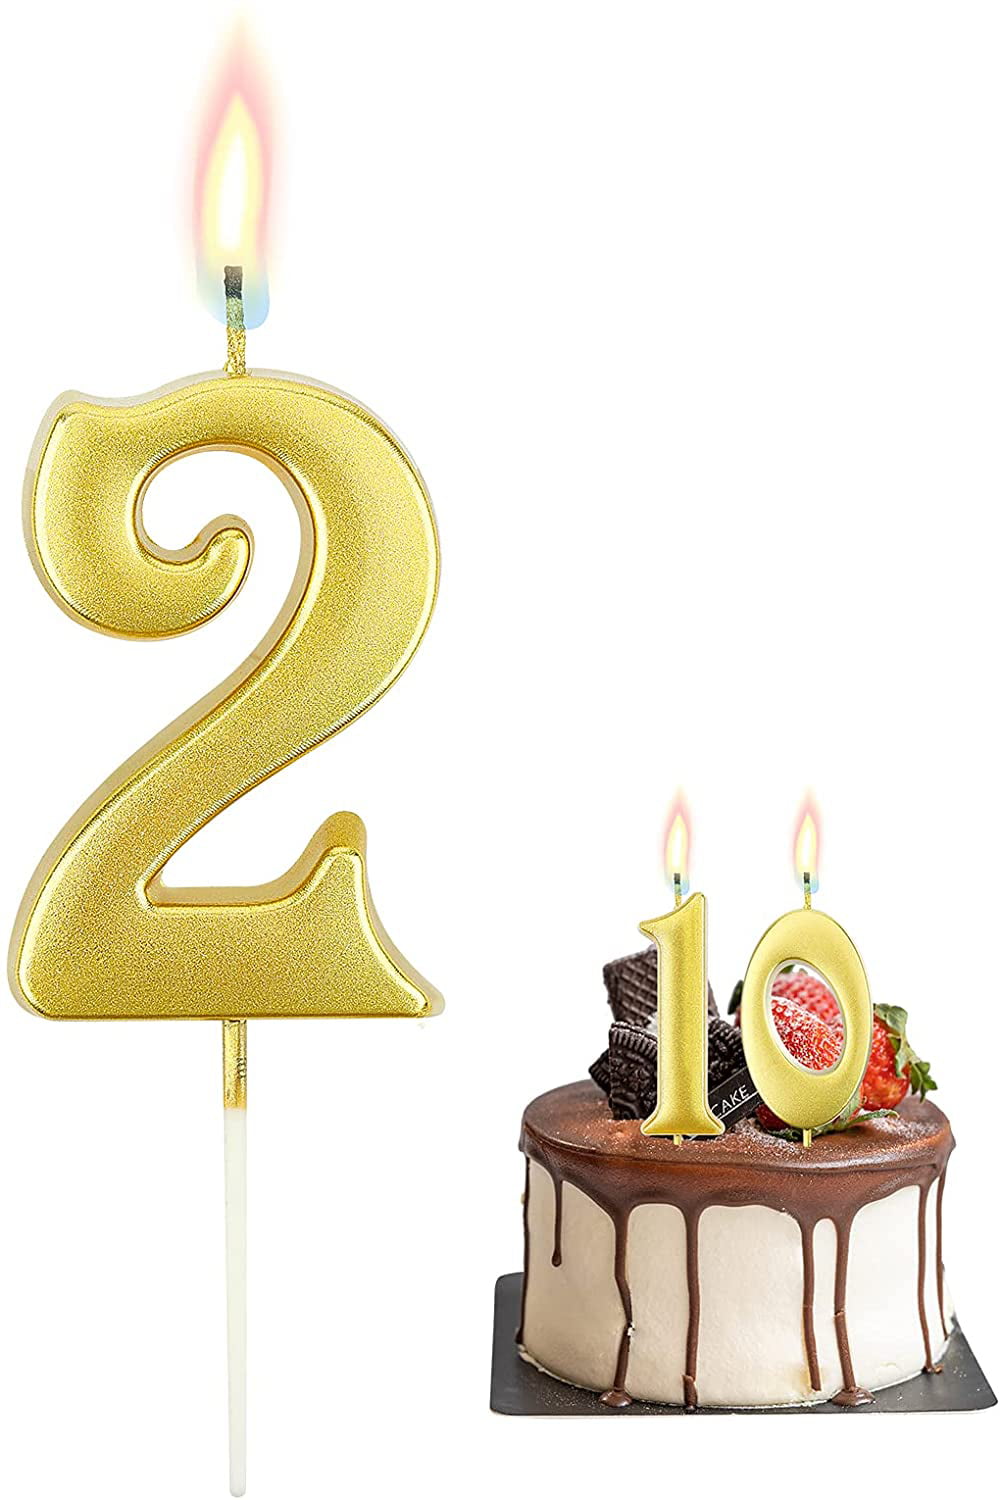 Gold Glitter Birthday Number Candle Suitable For Kids And Adults Graduation Party Etc. Wedding Anniversary Parties Can Decorate Birthday Parties URAQT Number Candles 0 Birthday Cake Candles 